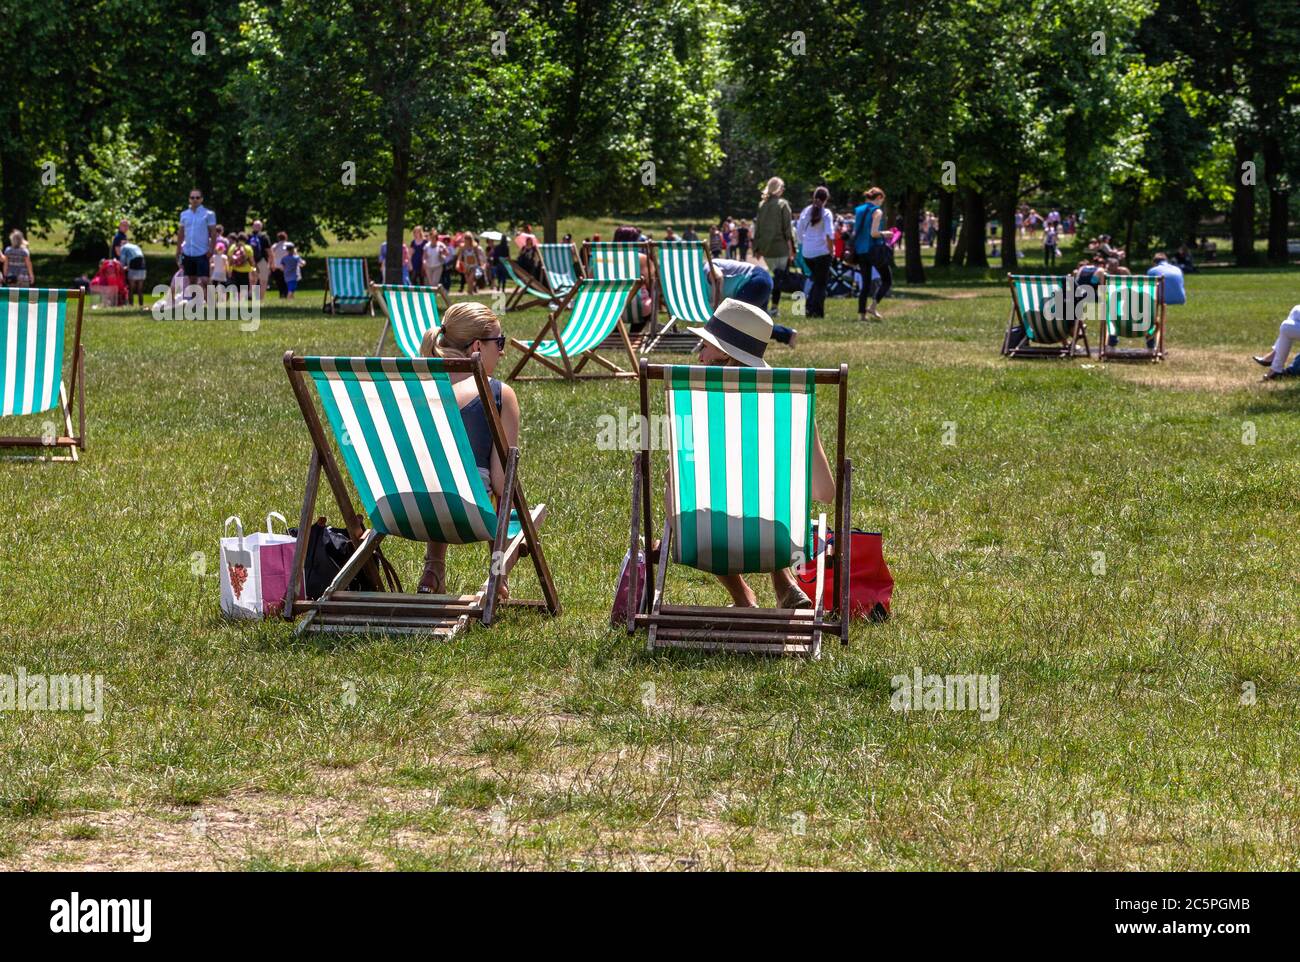 Scattered loungers and people on a park grassy field, London, England, UK. Stock Photo